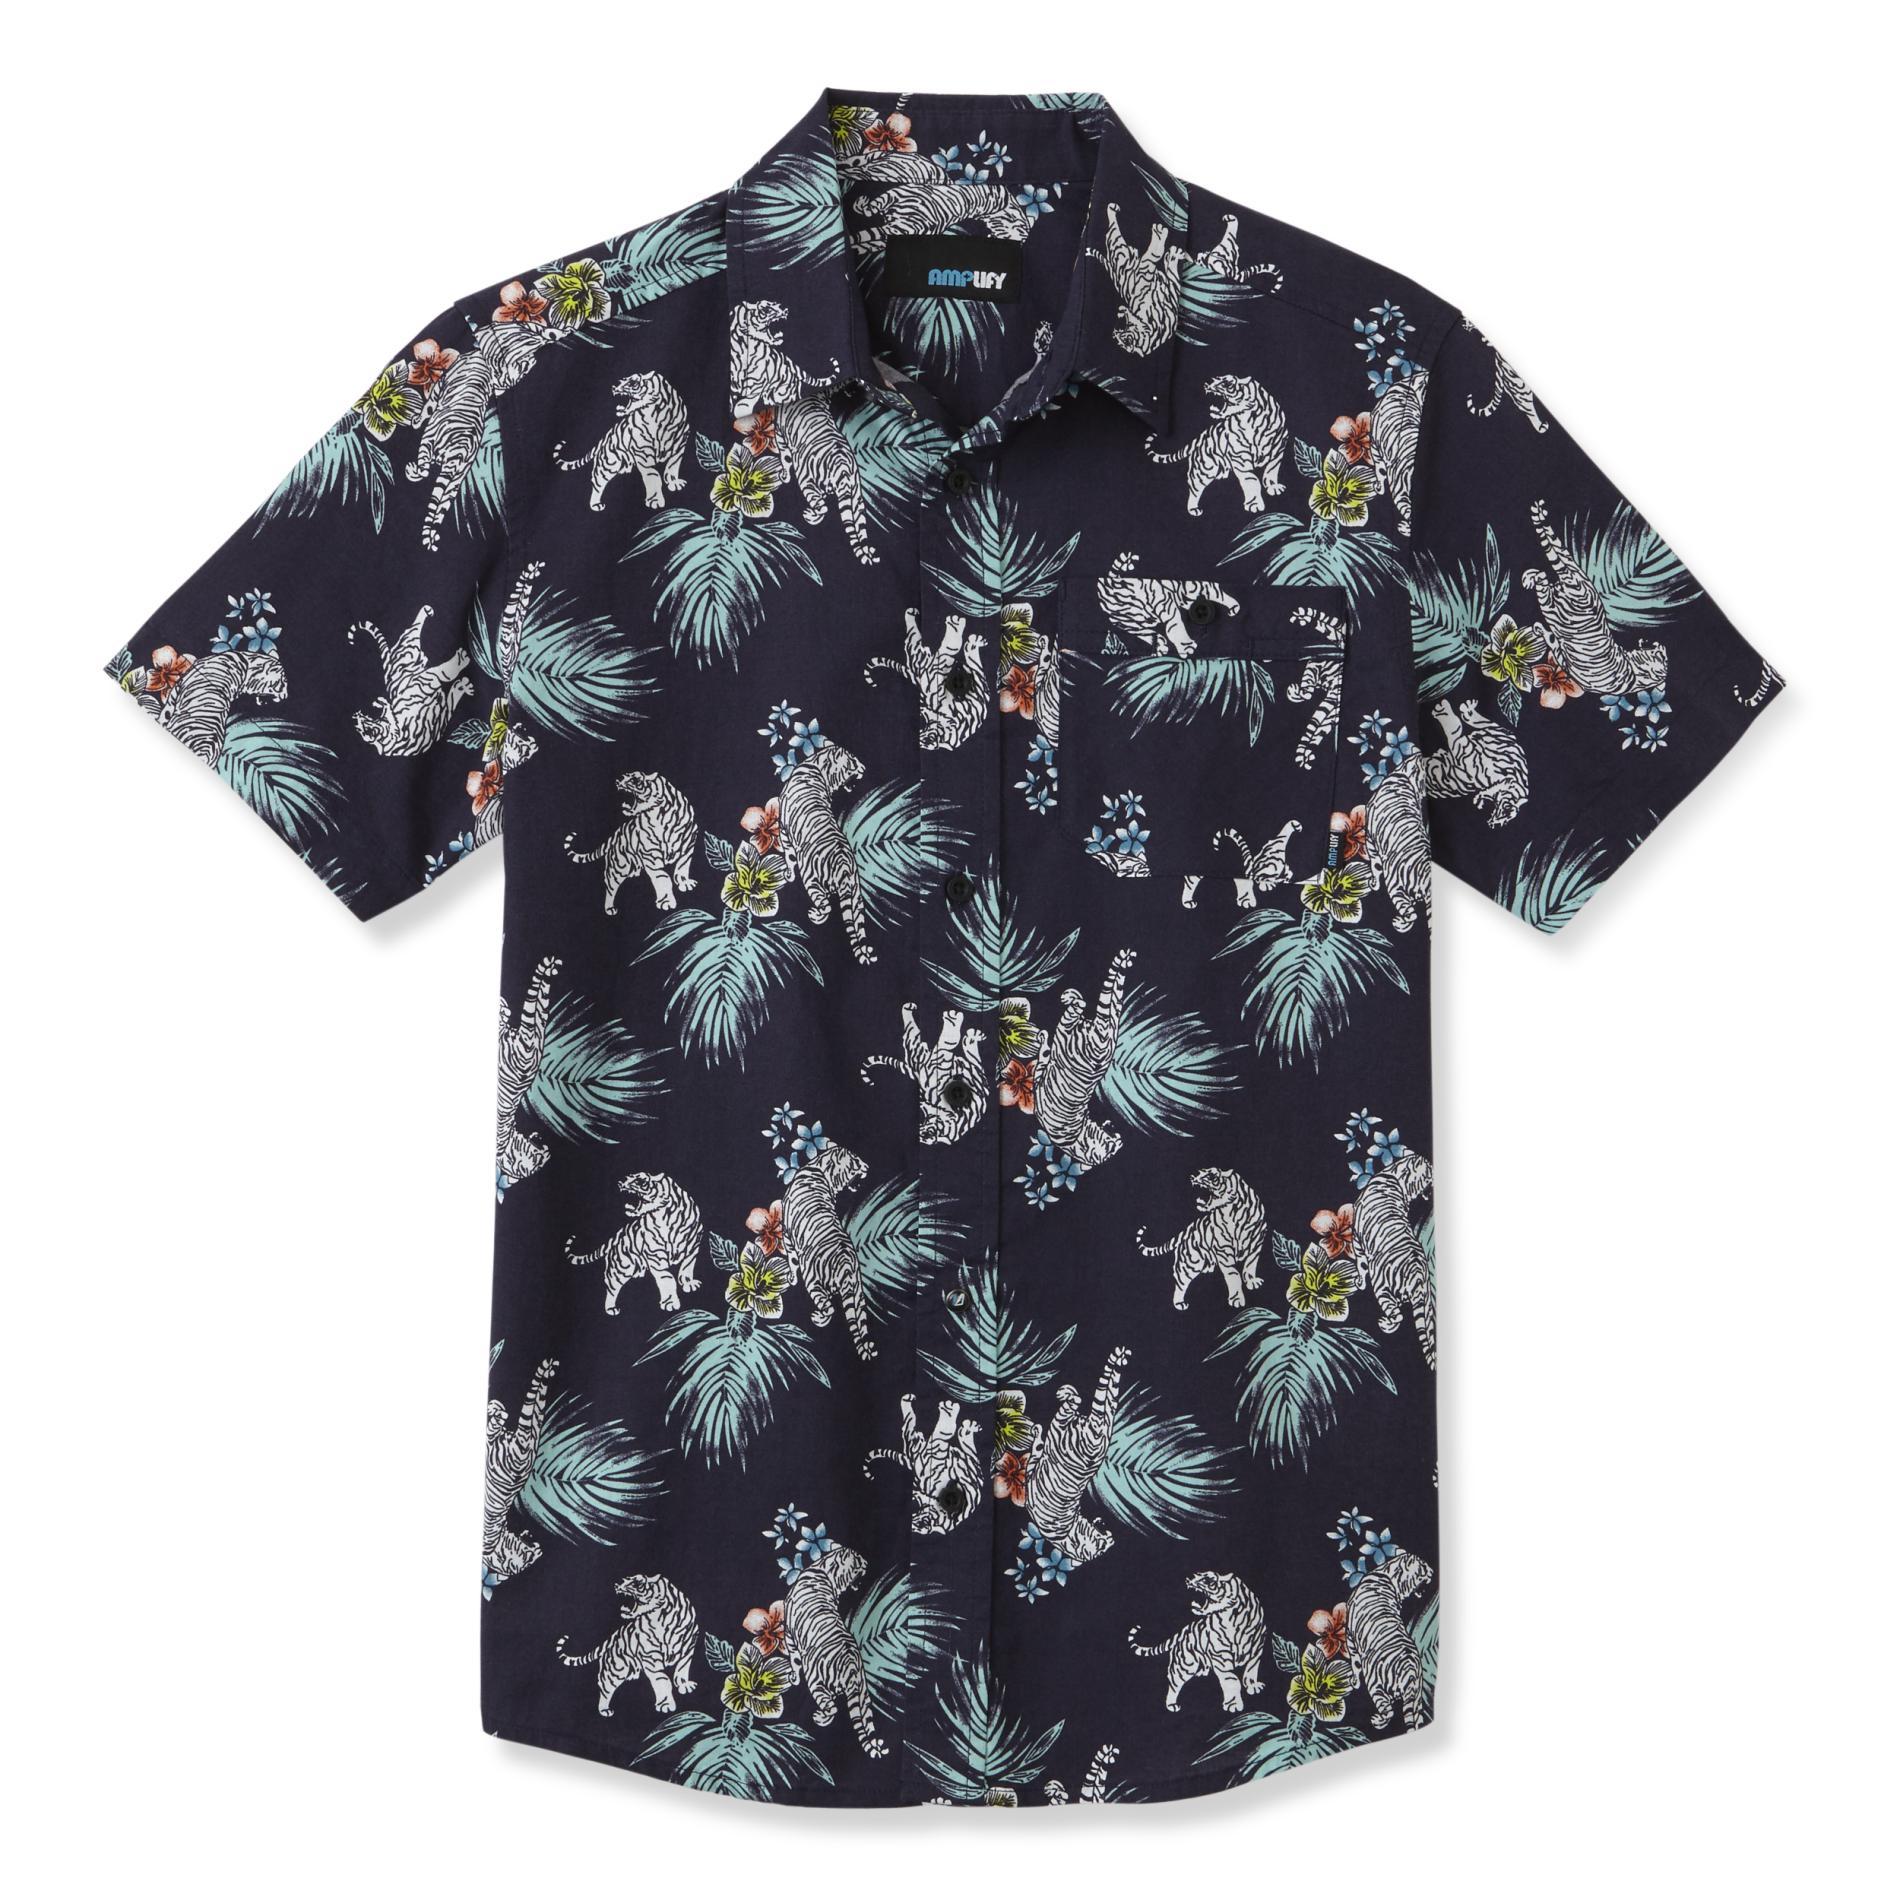 Amplify Boys' Short-Sleeve Button-Front Shirt - Tigers